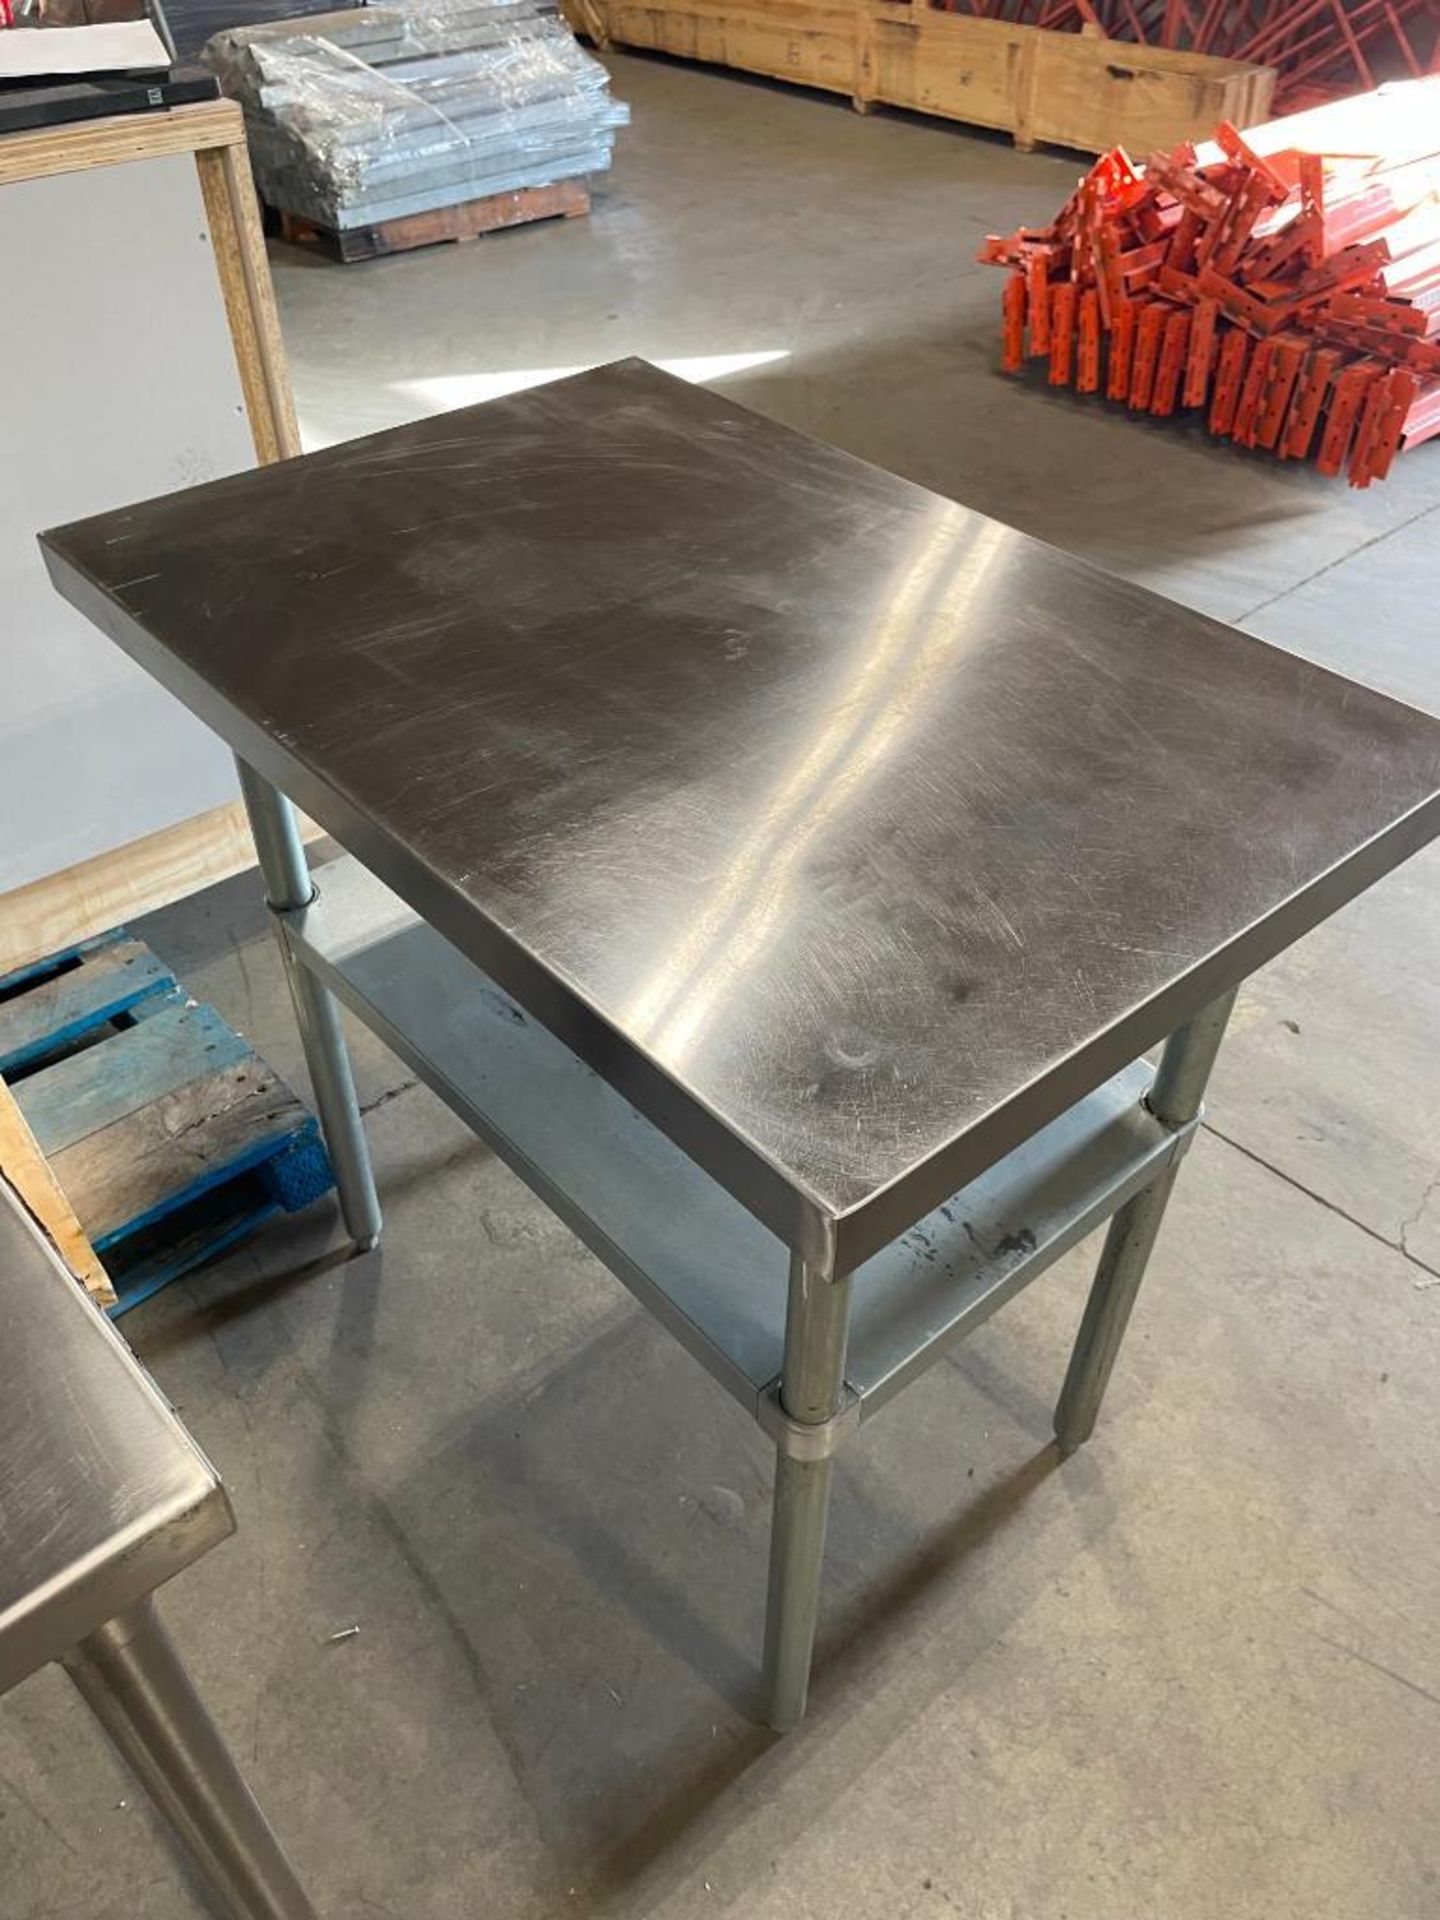 EFI 36" X 24" STAINLESS STEEL WORK TABLE - Image 5 of 6